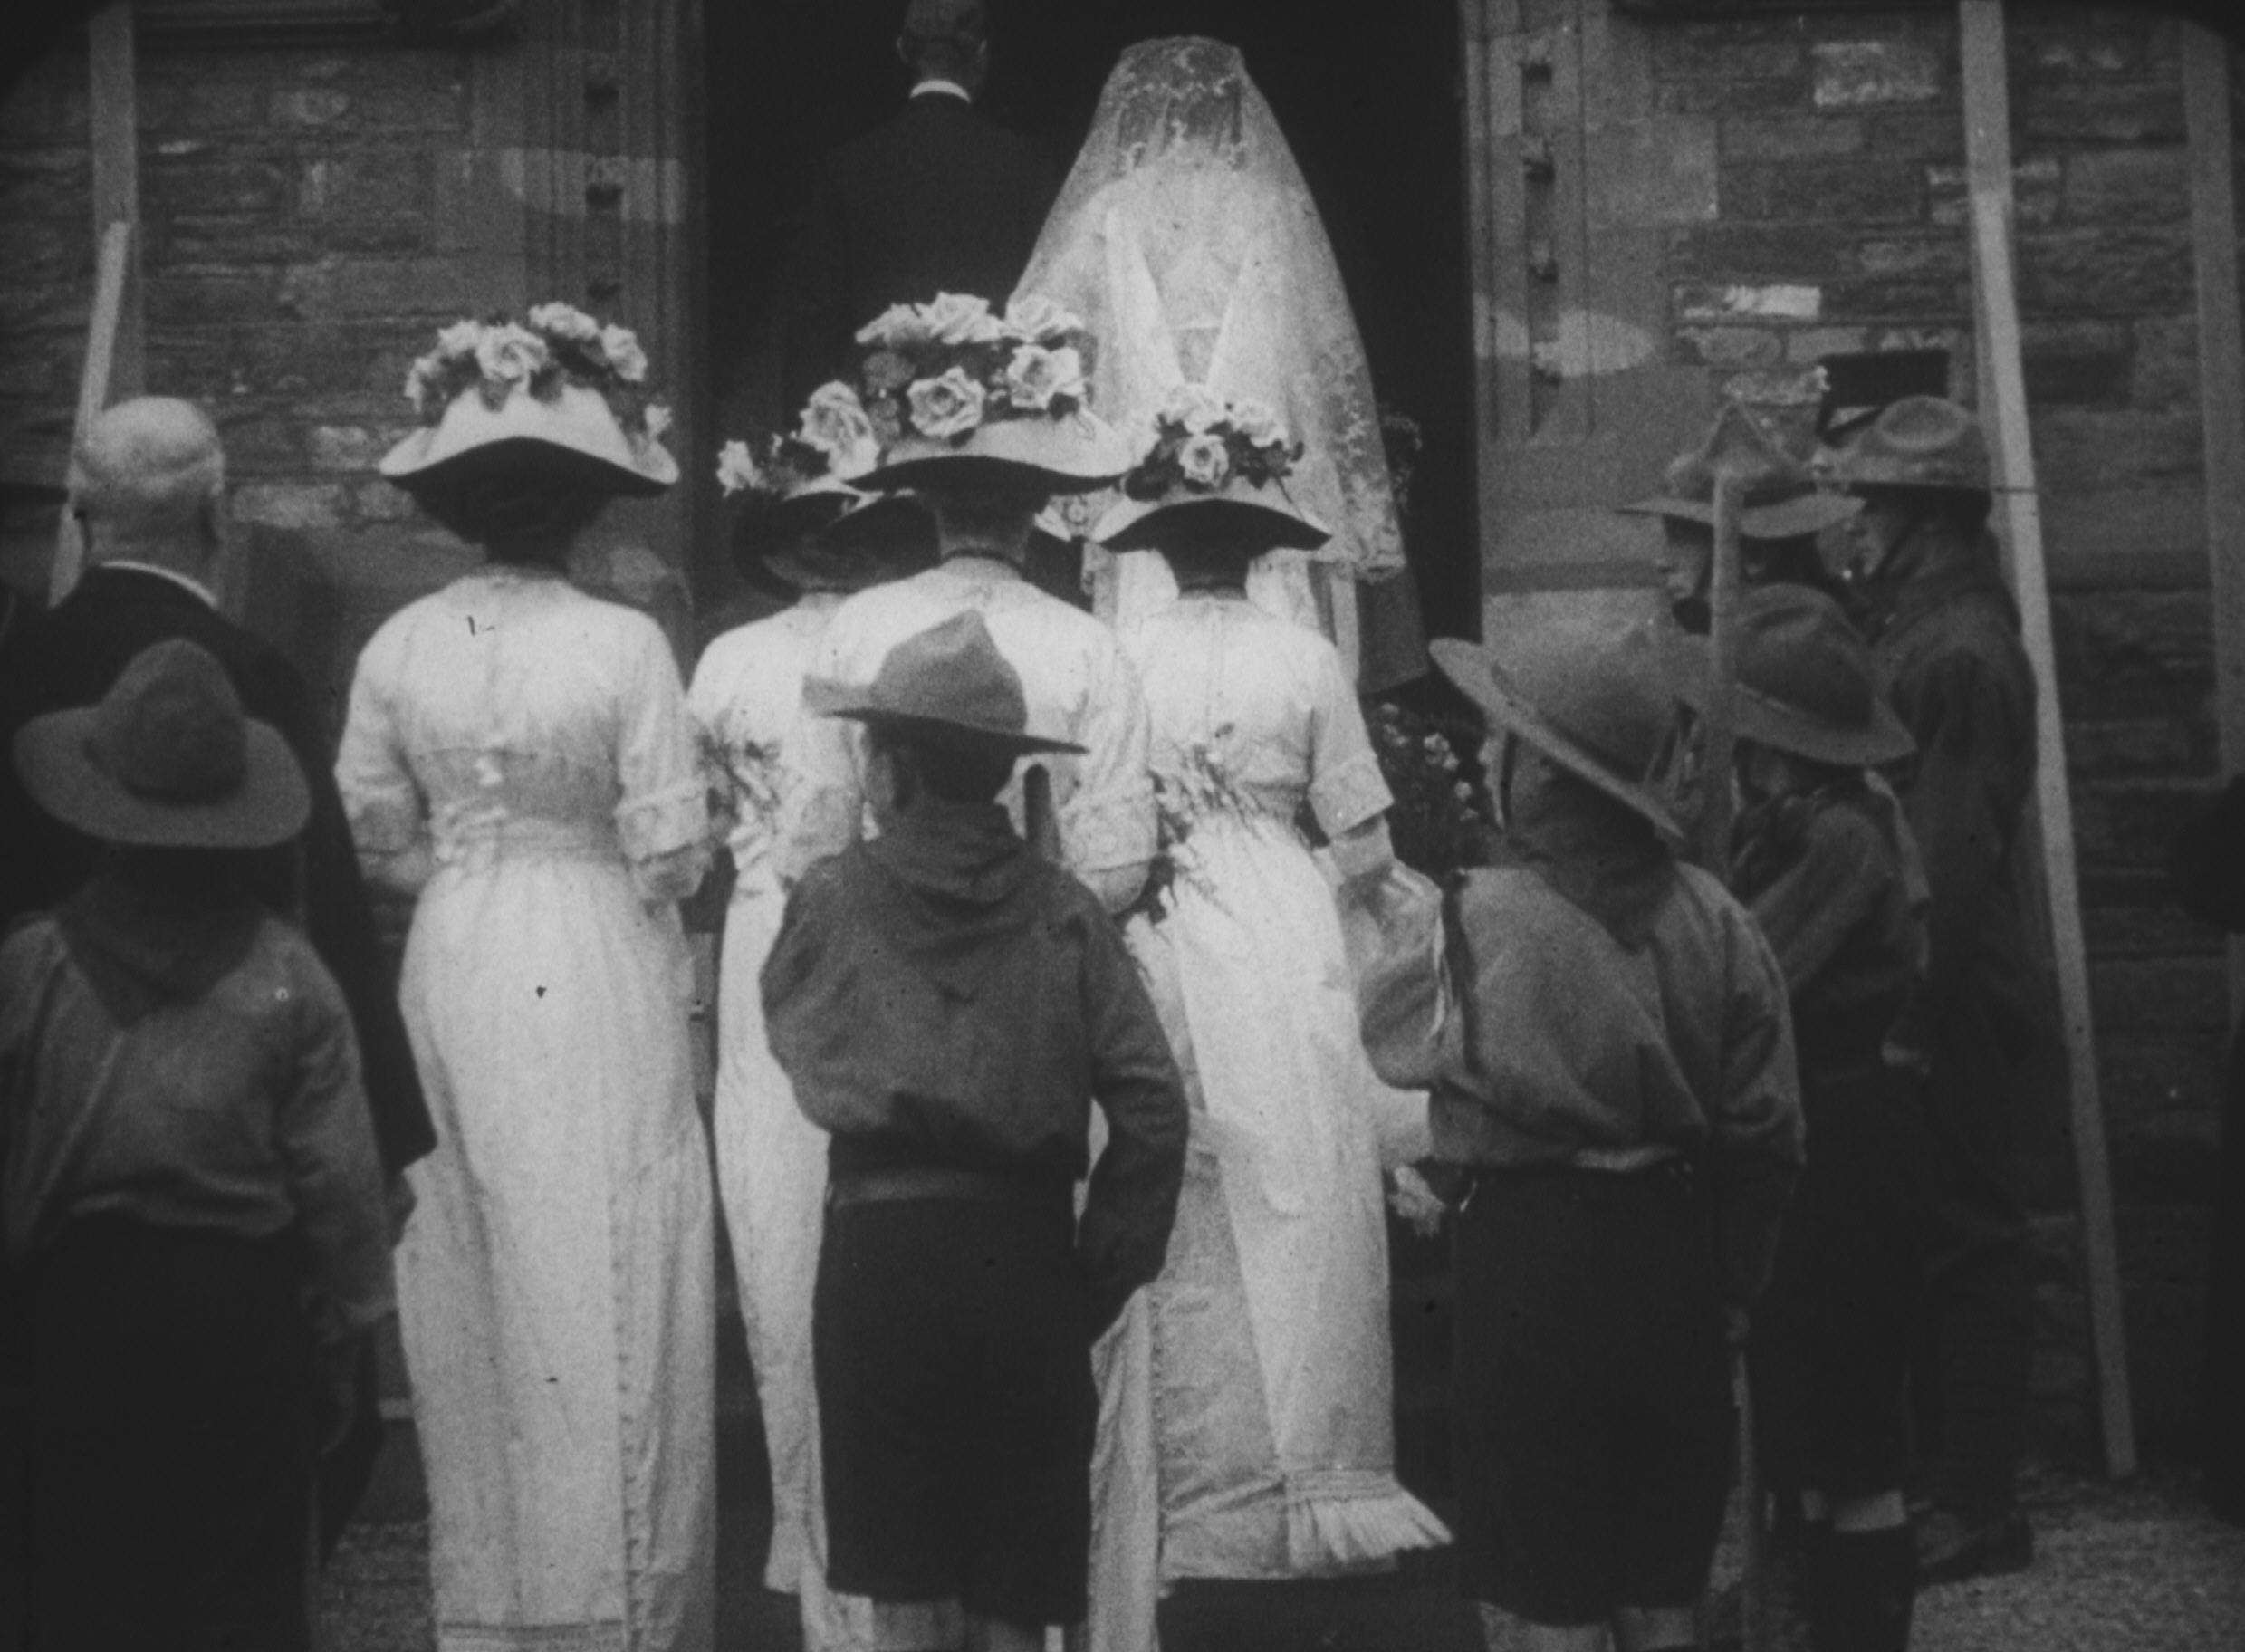 The bridal procession enters the church